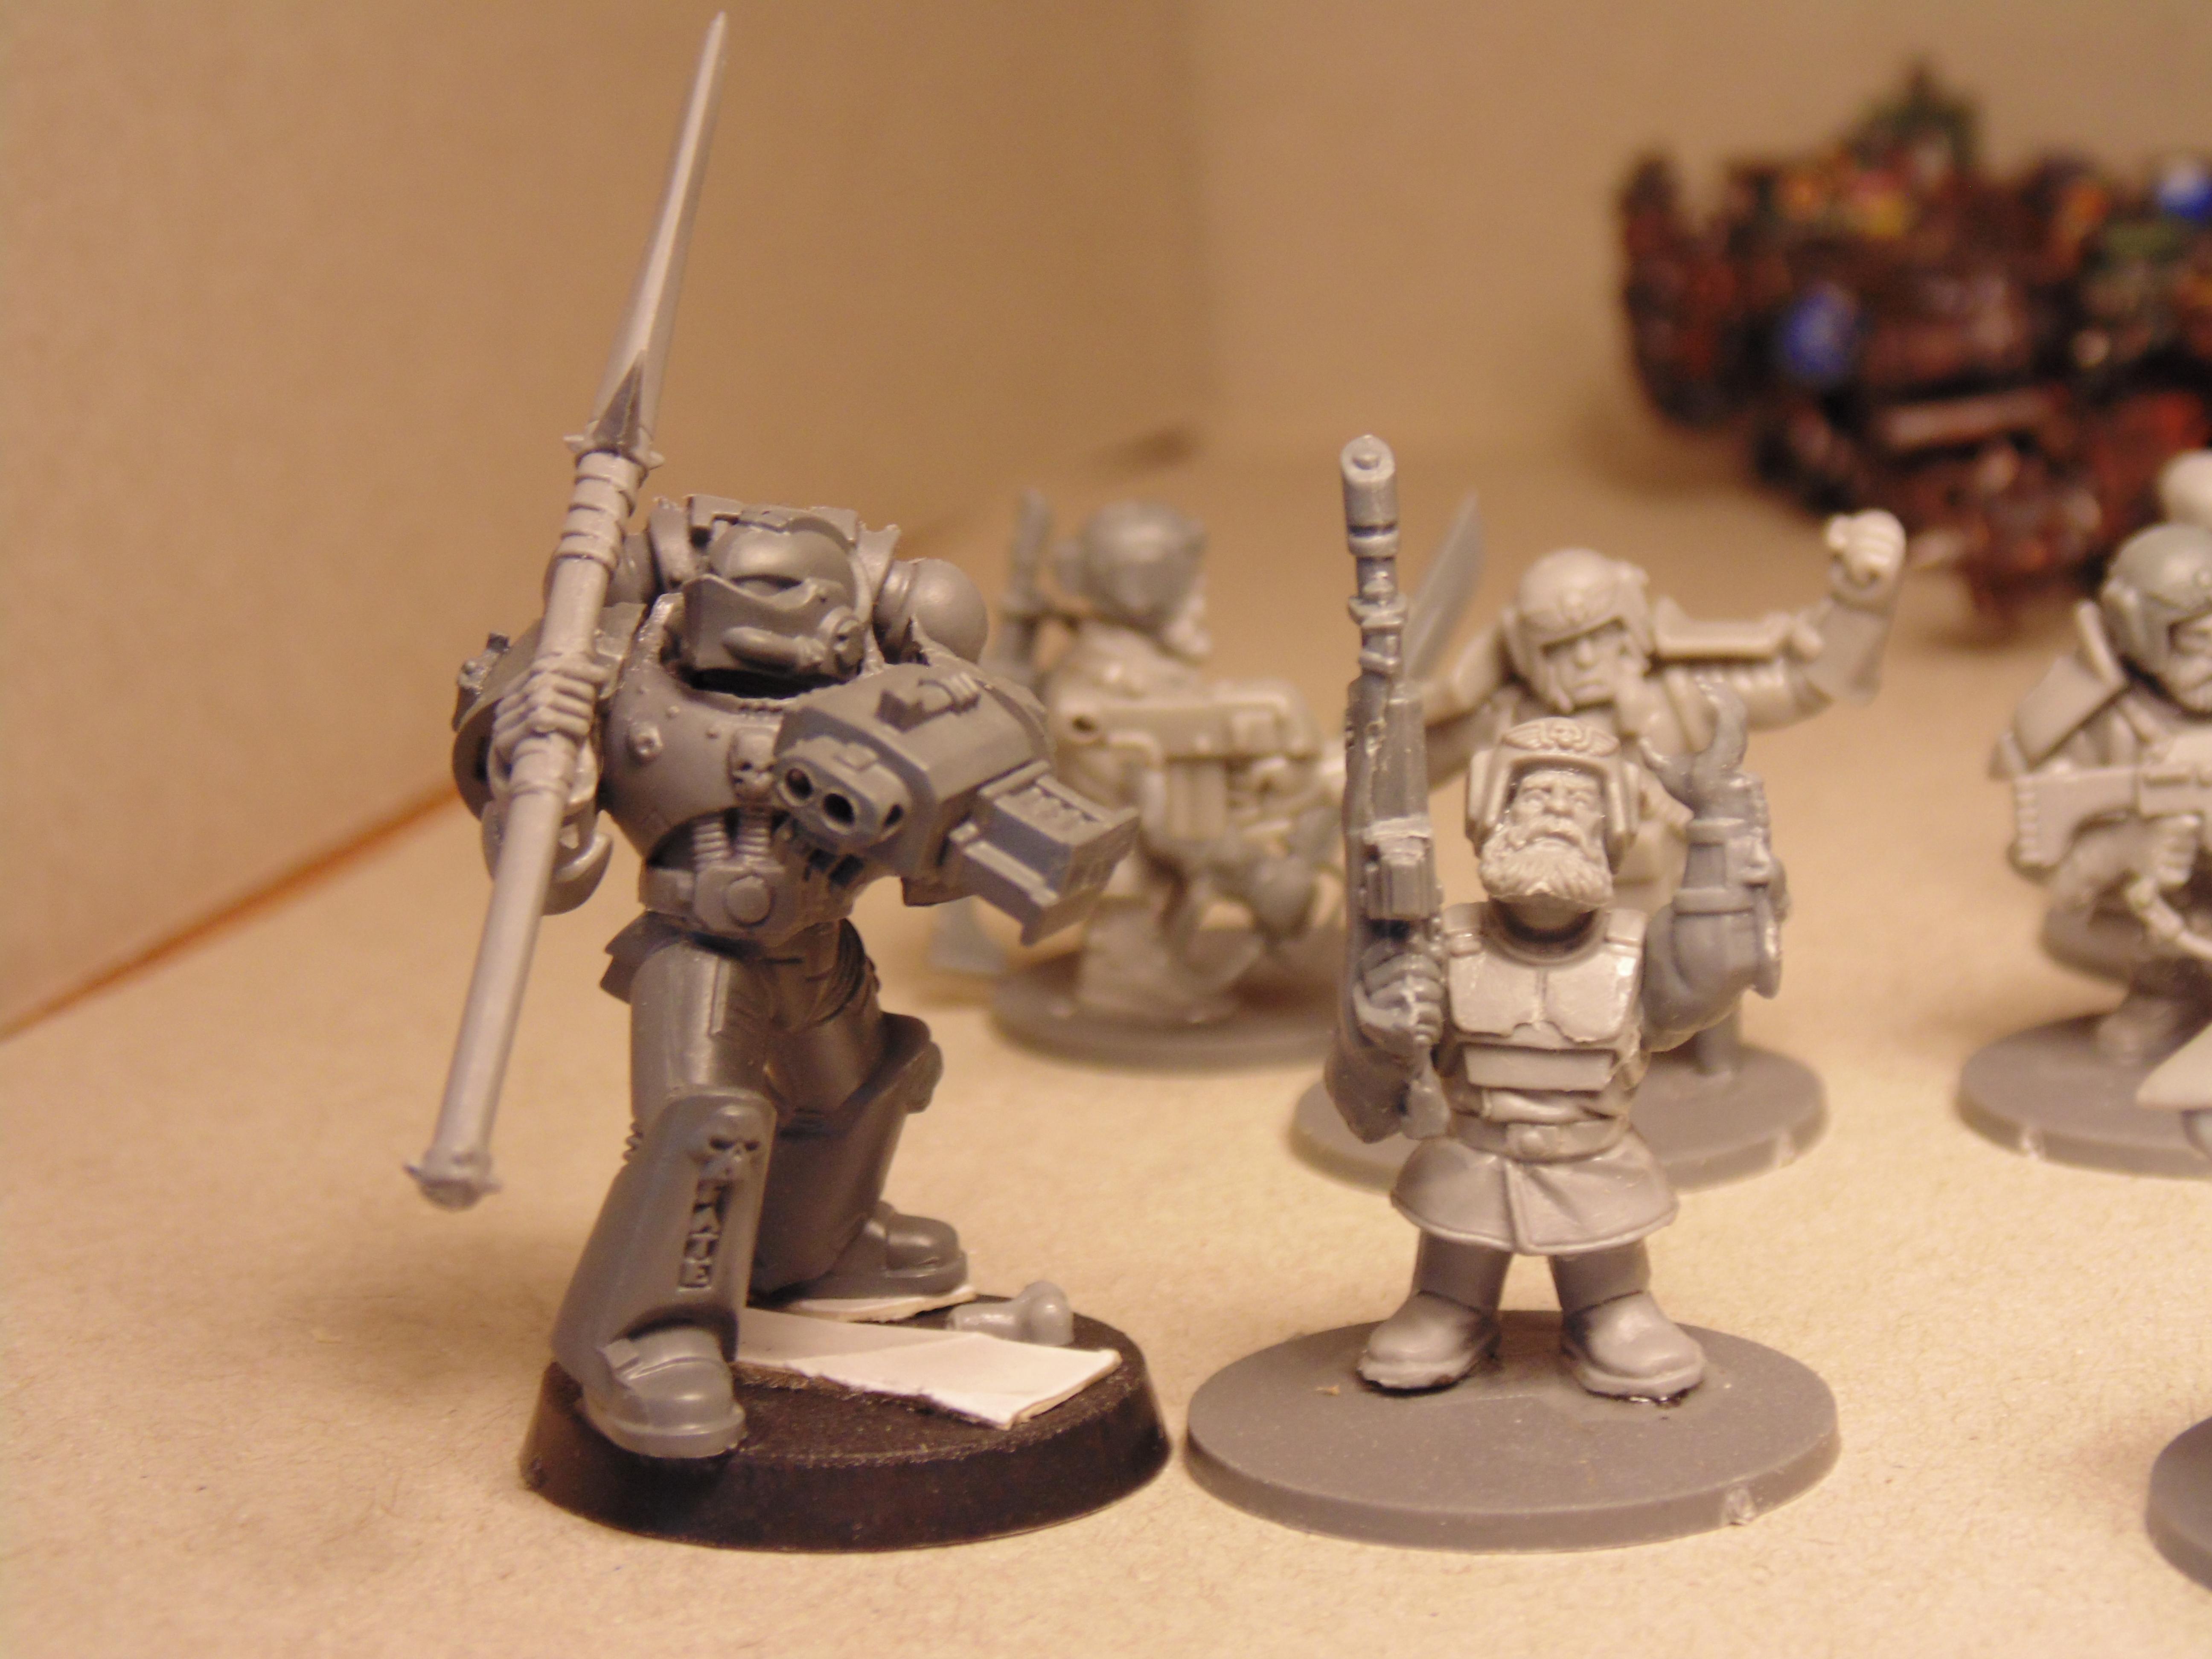 Army, Bike, Codex, Conversion, Dwarves, Exo, Exosuits, Imperial, Little, Old, Oldhammer, Rogue, School, Scratch, Scratch Build, Small, Soldiers, Space, Squad, Squats, Suit, Trader, Votann, White